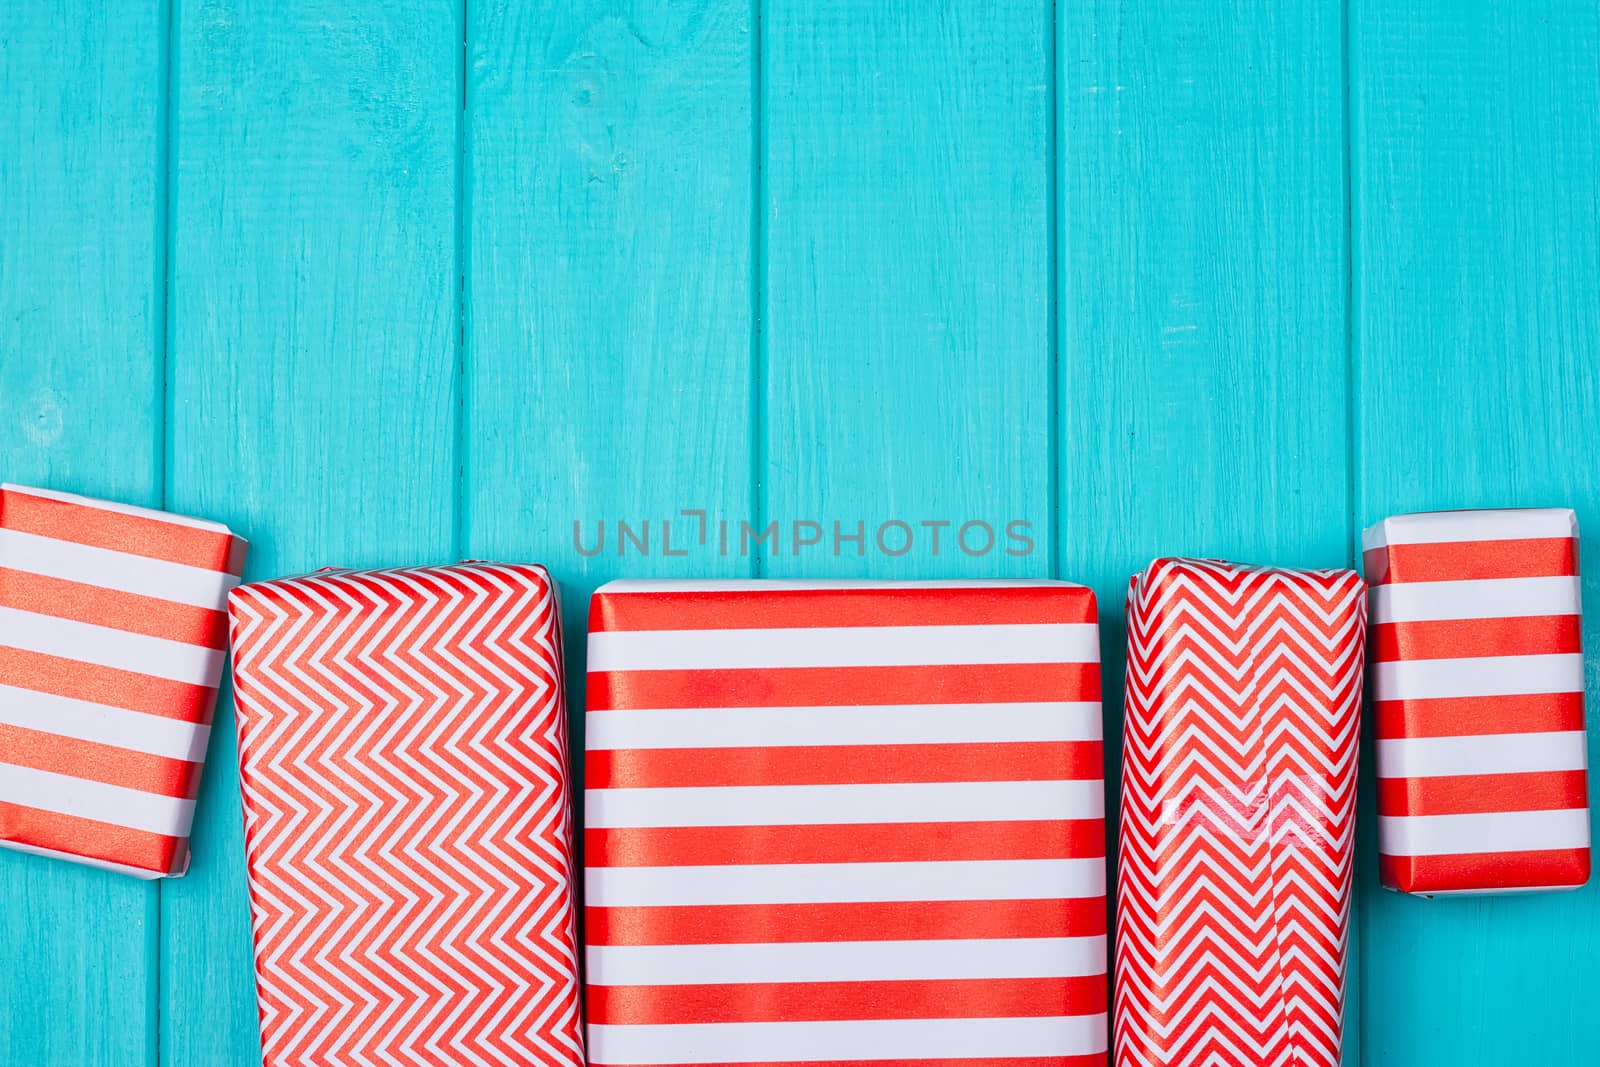 Many gifts in a red and white wrapper on a blue wooden background